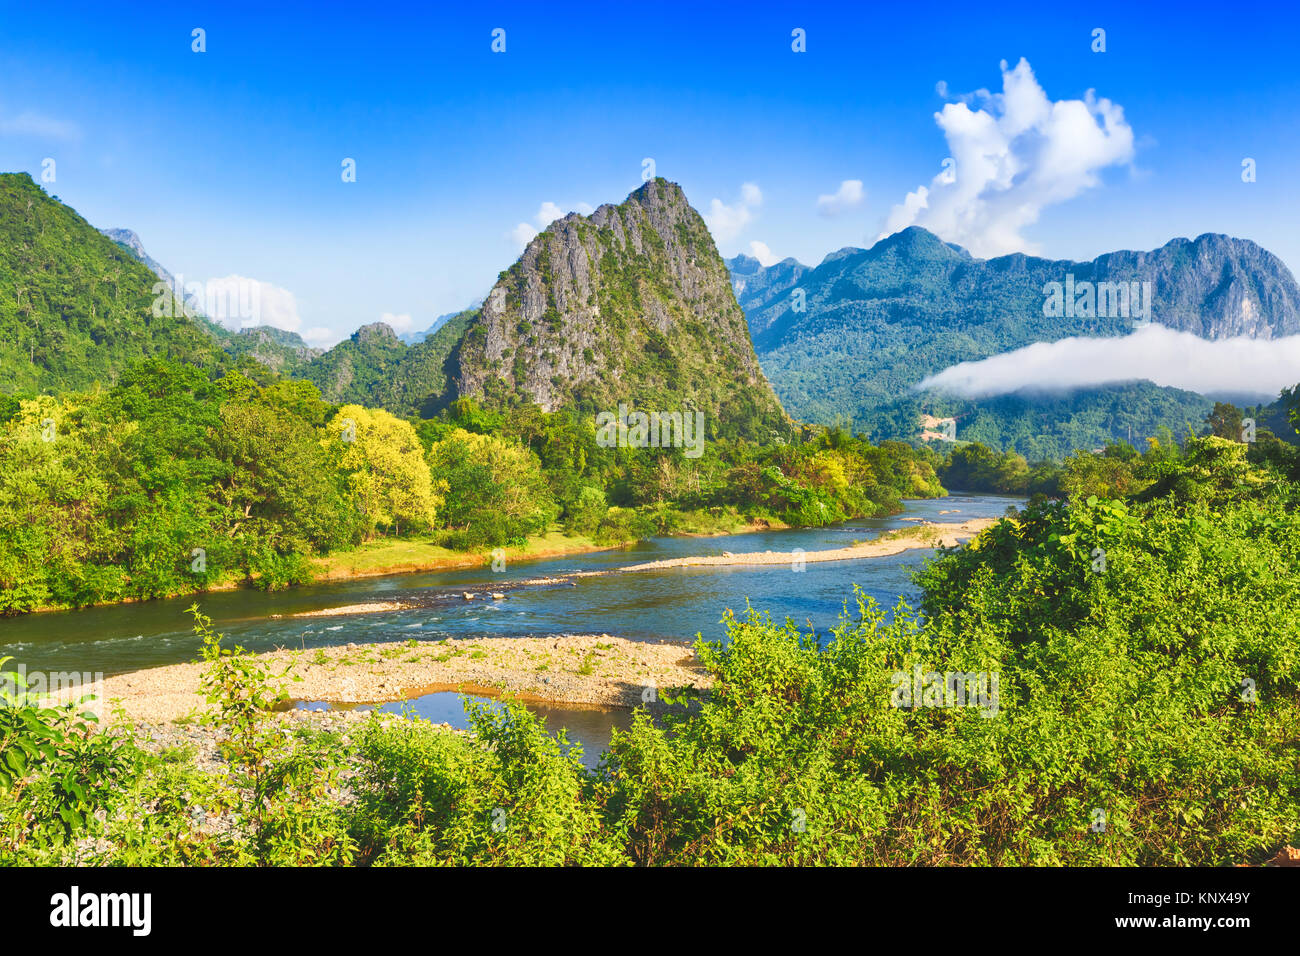 Amazing landscape of Nam Song river among mountains. Vang Vieng. Laos. Stock Photo